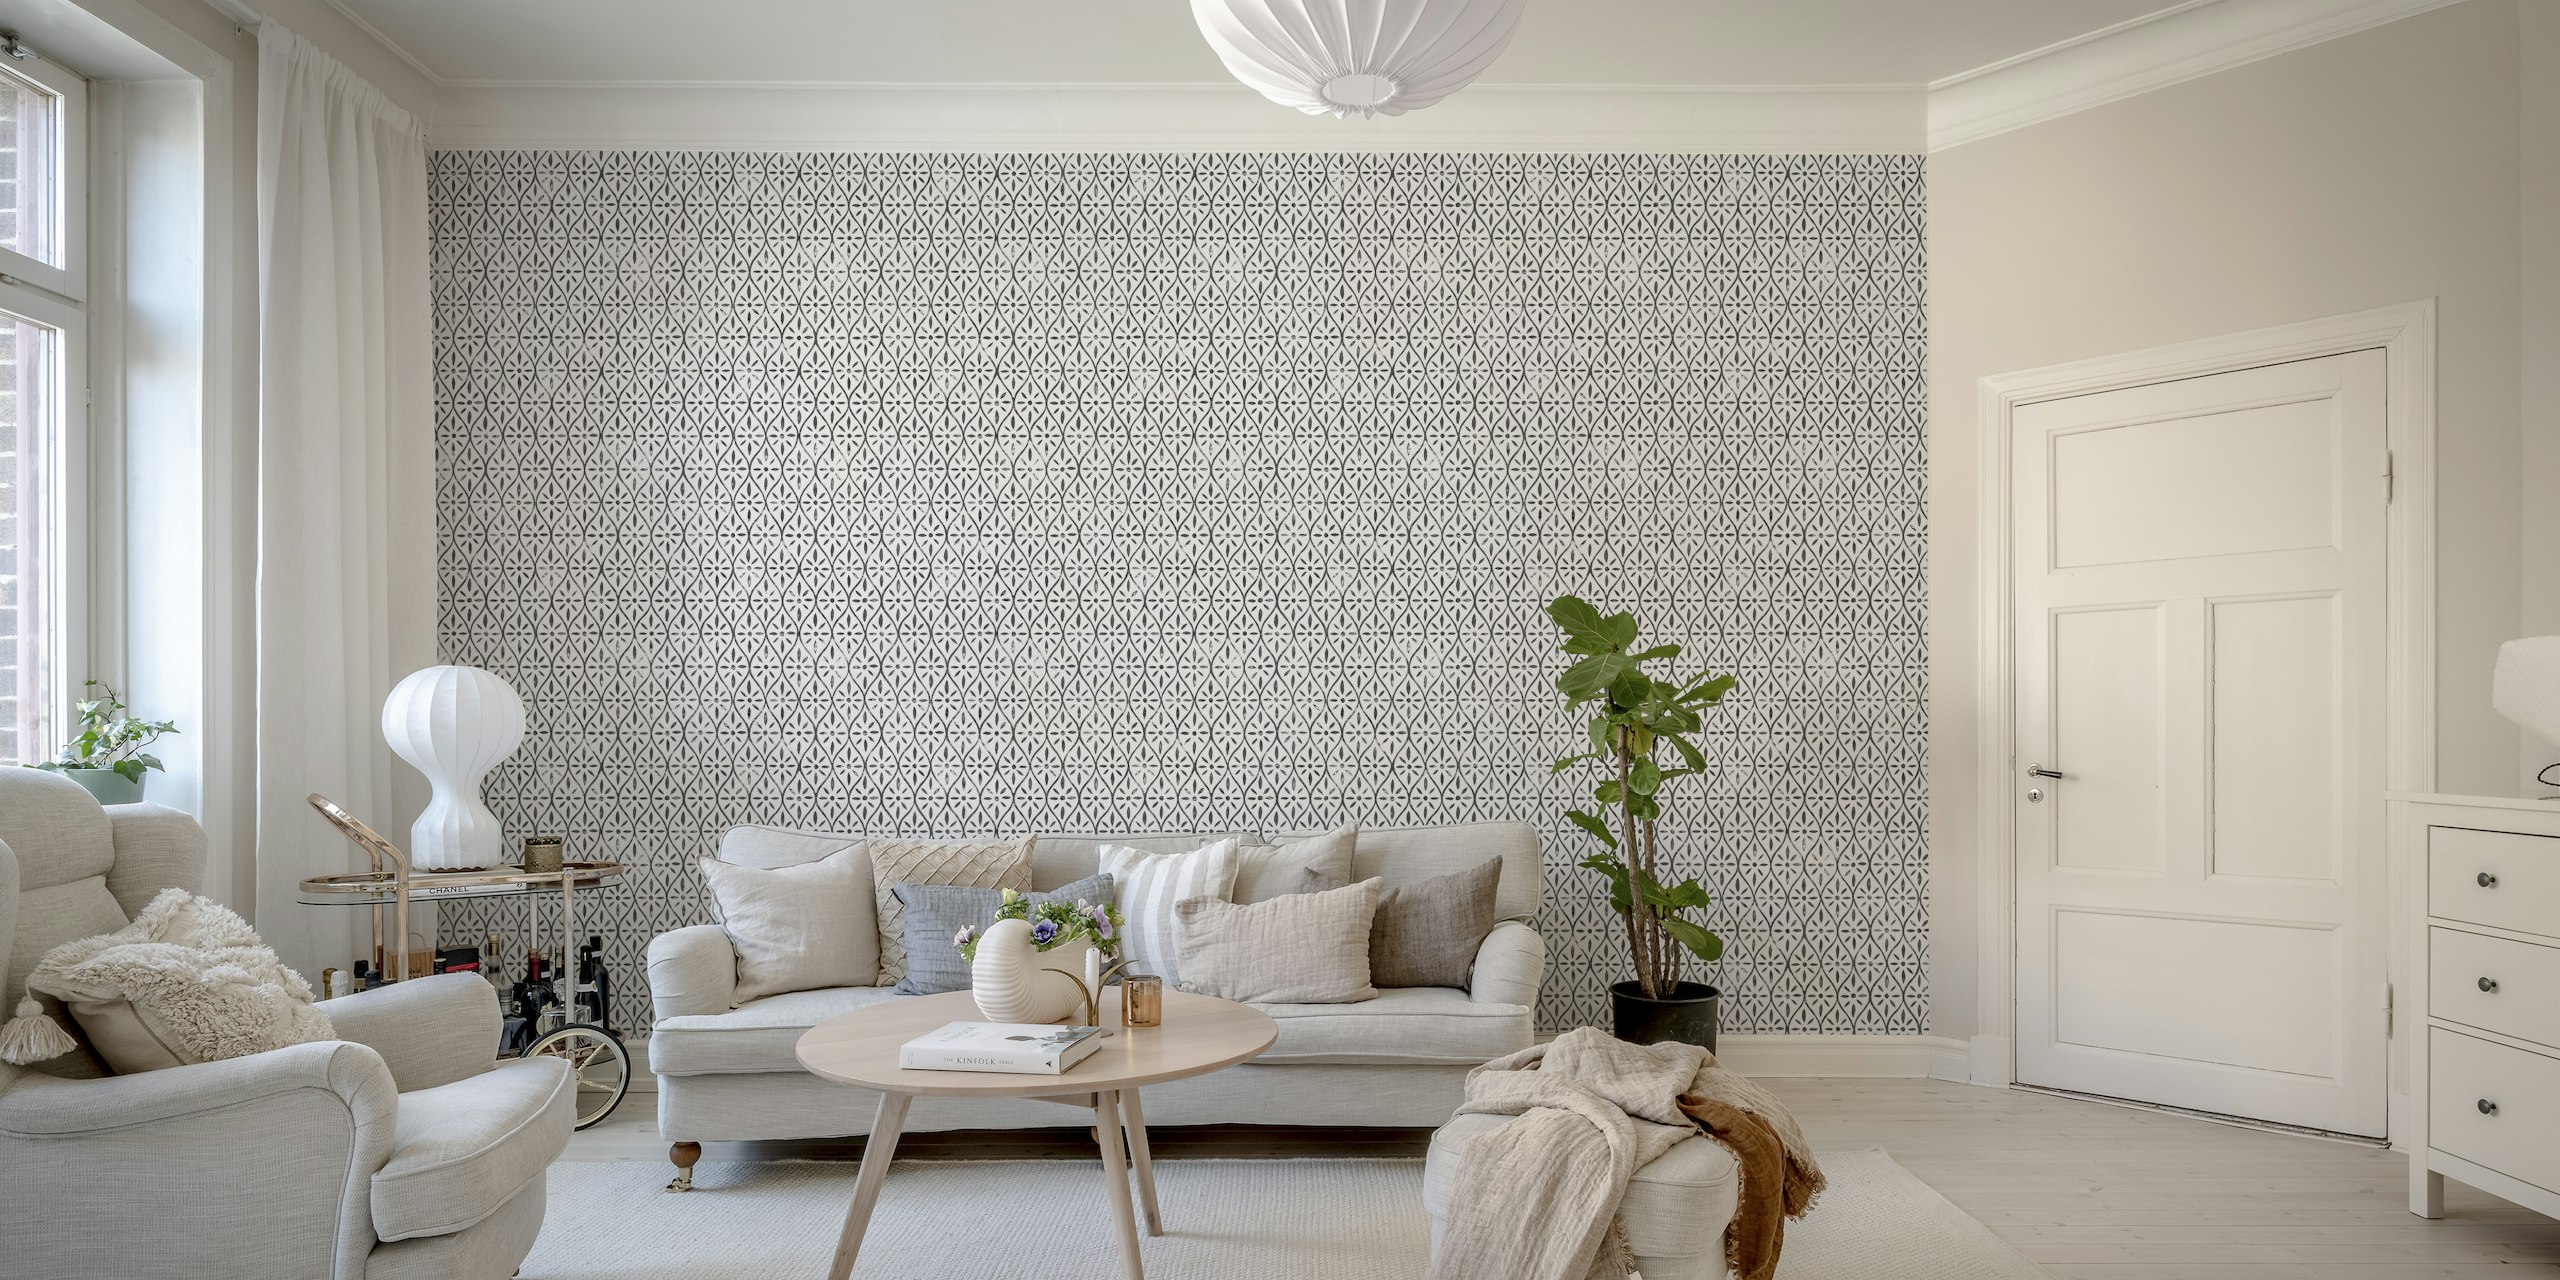 Timeless Azuleo Tiles wall mural with black and white Mediterranean-inspired pattern